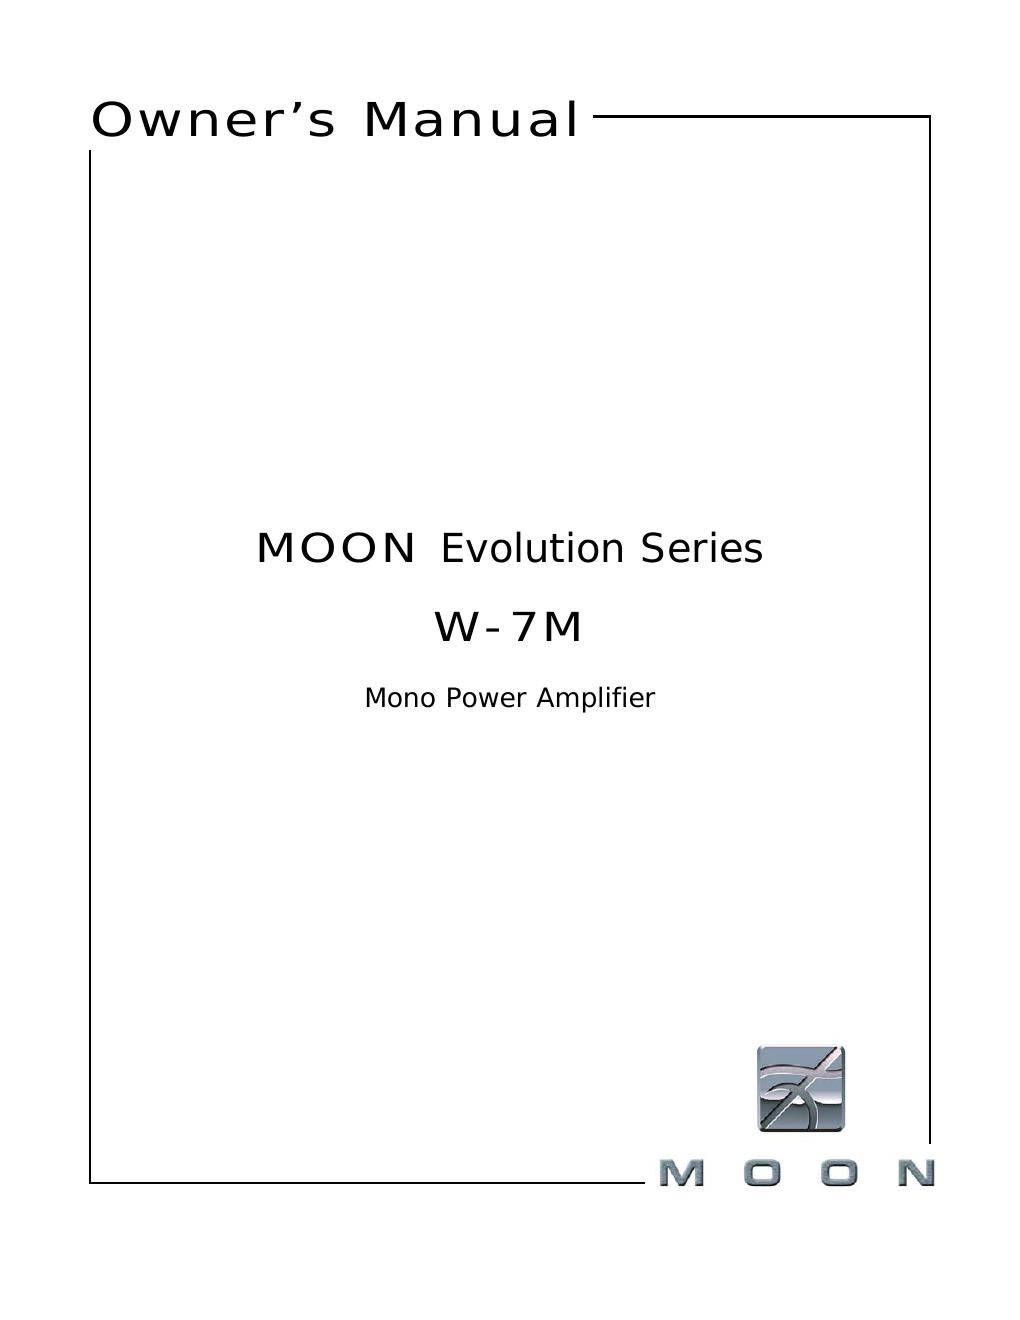 moon w 7 m owners manual